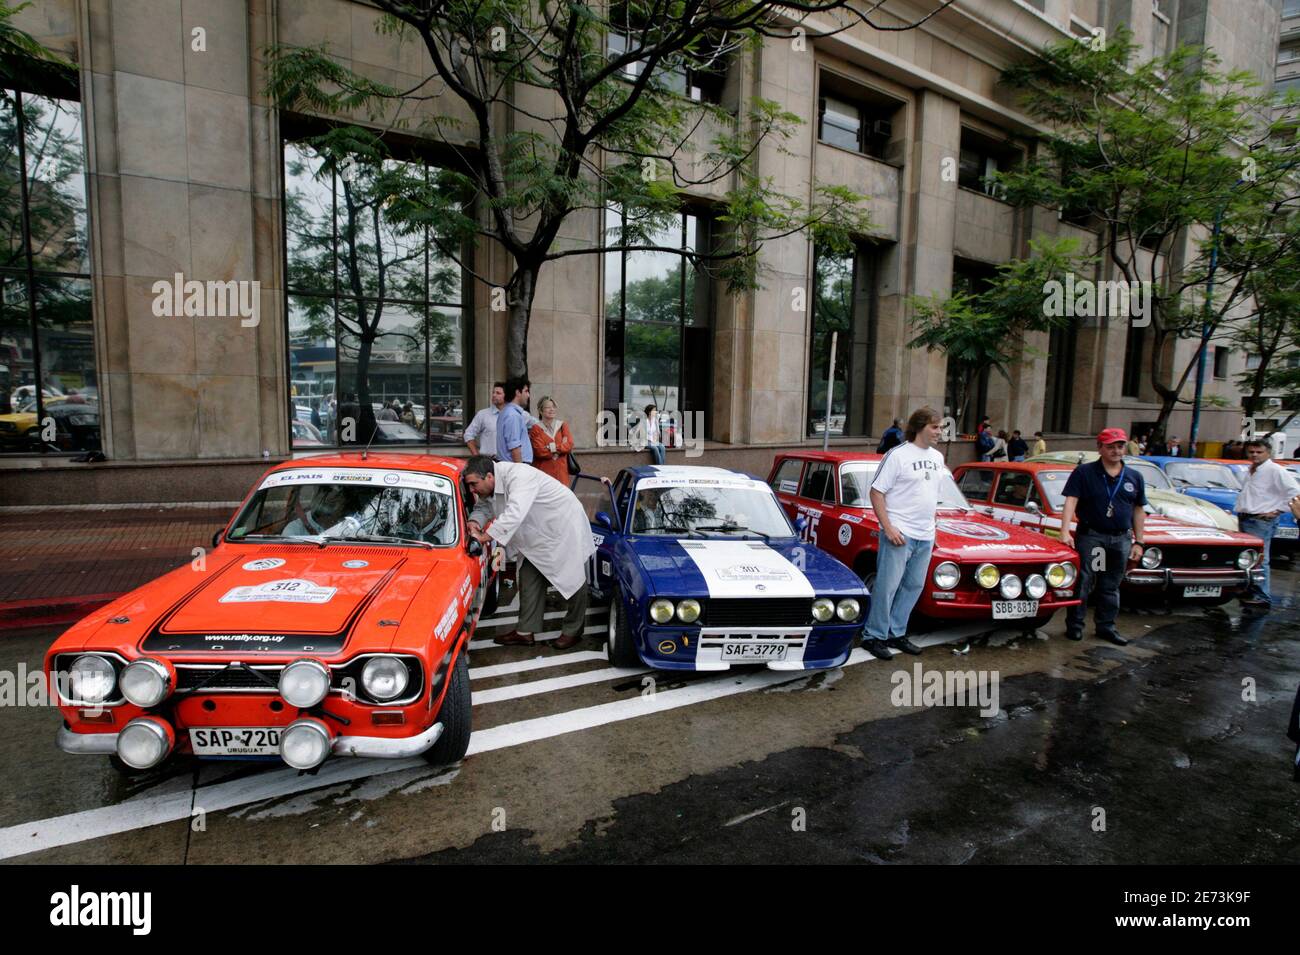 Classic cars are seen before the start of the 'Gran Premio del Uruguay, 19 capitales historico' (Uruguayan great prize, 19 capitals) rally in Montevideo March 4, 2009. Only classic cars are allowed to participate in the rally which covers a route of over 2,500 km (1,553 miles) and traverses the 19 capitals of the provinces of the country. REUTERS/Andres Stapff (URUGUAY) Stock Photo